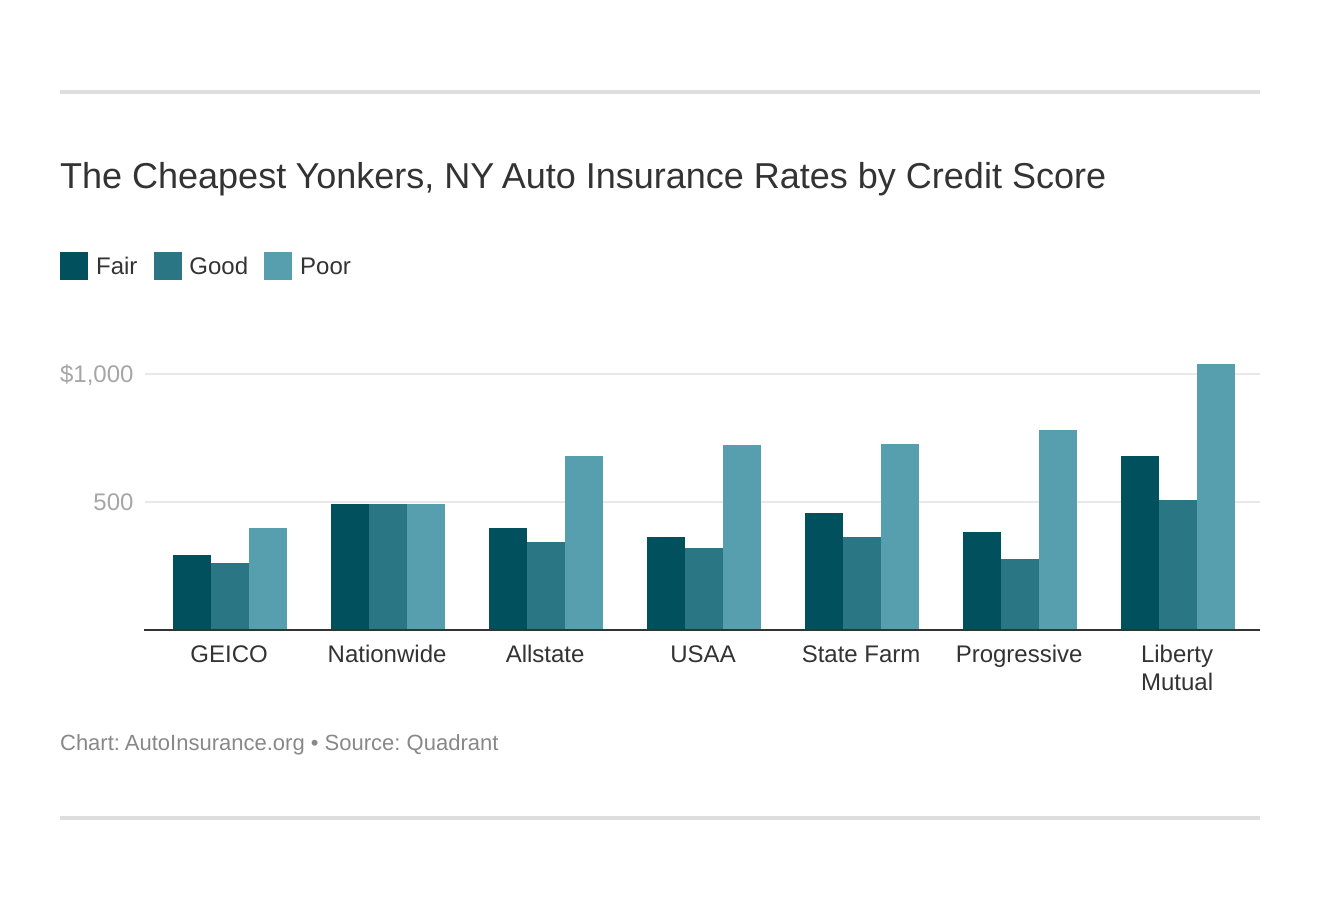 The Cheapest Yonkers, NY Auto Insurance Rates by Credit Score